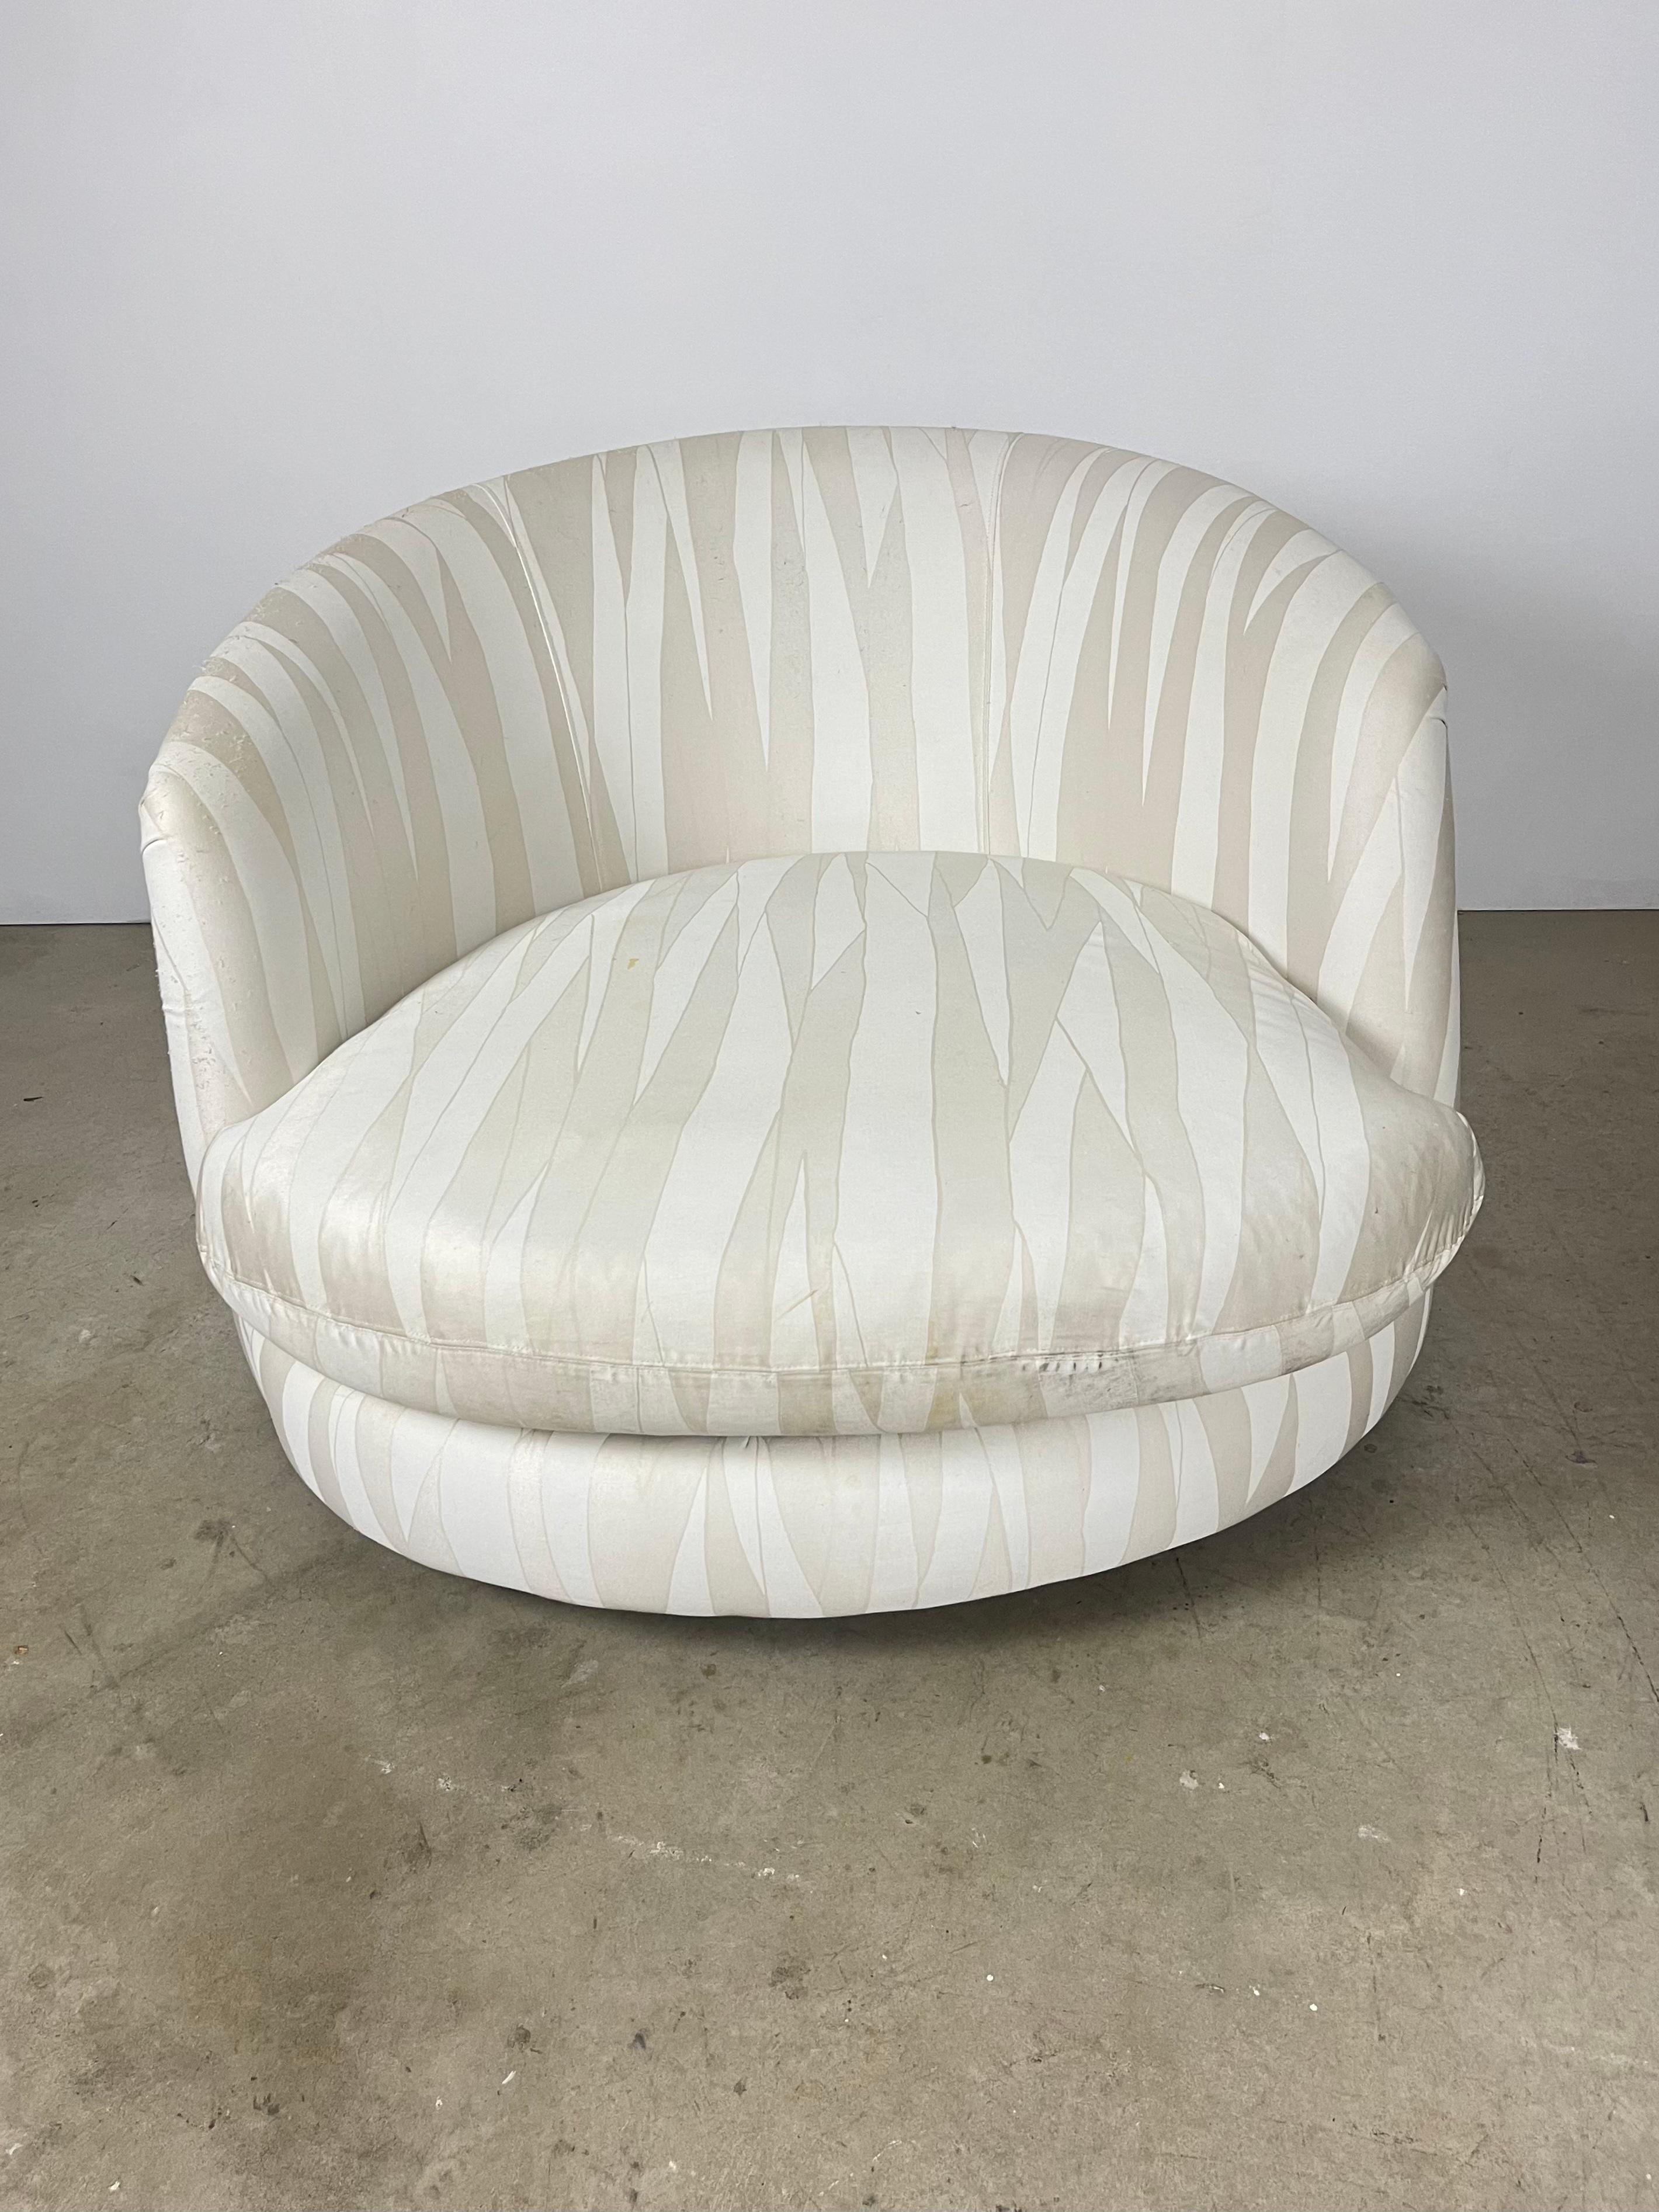 Oversized large scale swivel chair designed by Milo Baughman for Thayer Coggin. Original upholstery is present, recommended to be replaced. Chrome base is present. Piece retains original Thayer Coggin tags. Wear to the upholstery, pilling on the